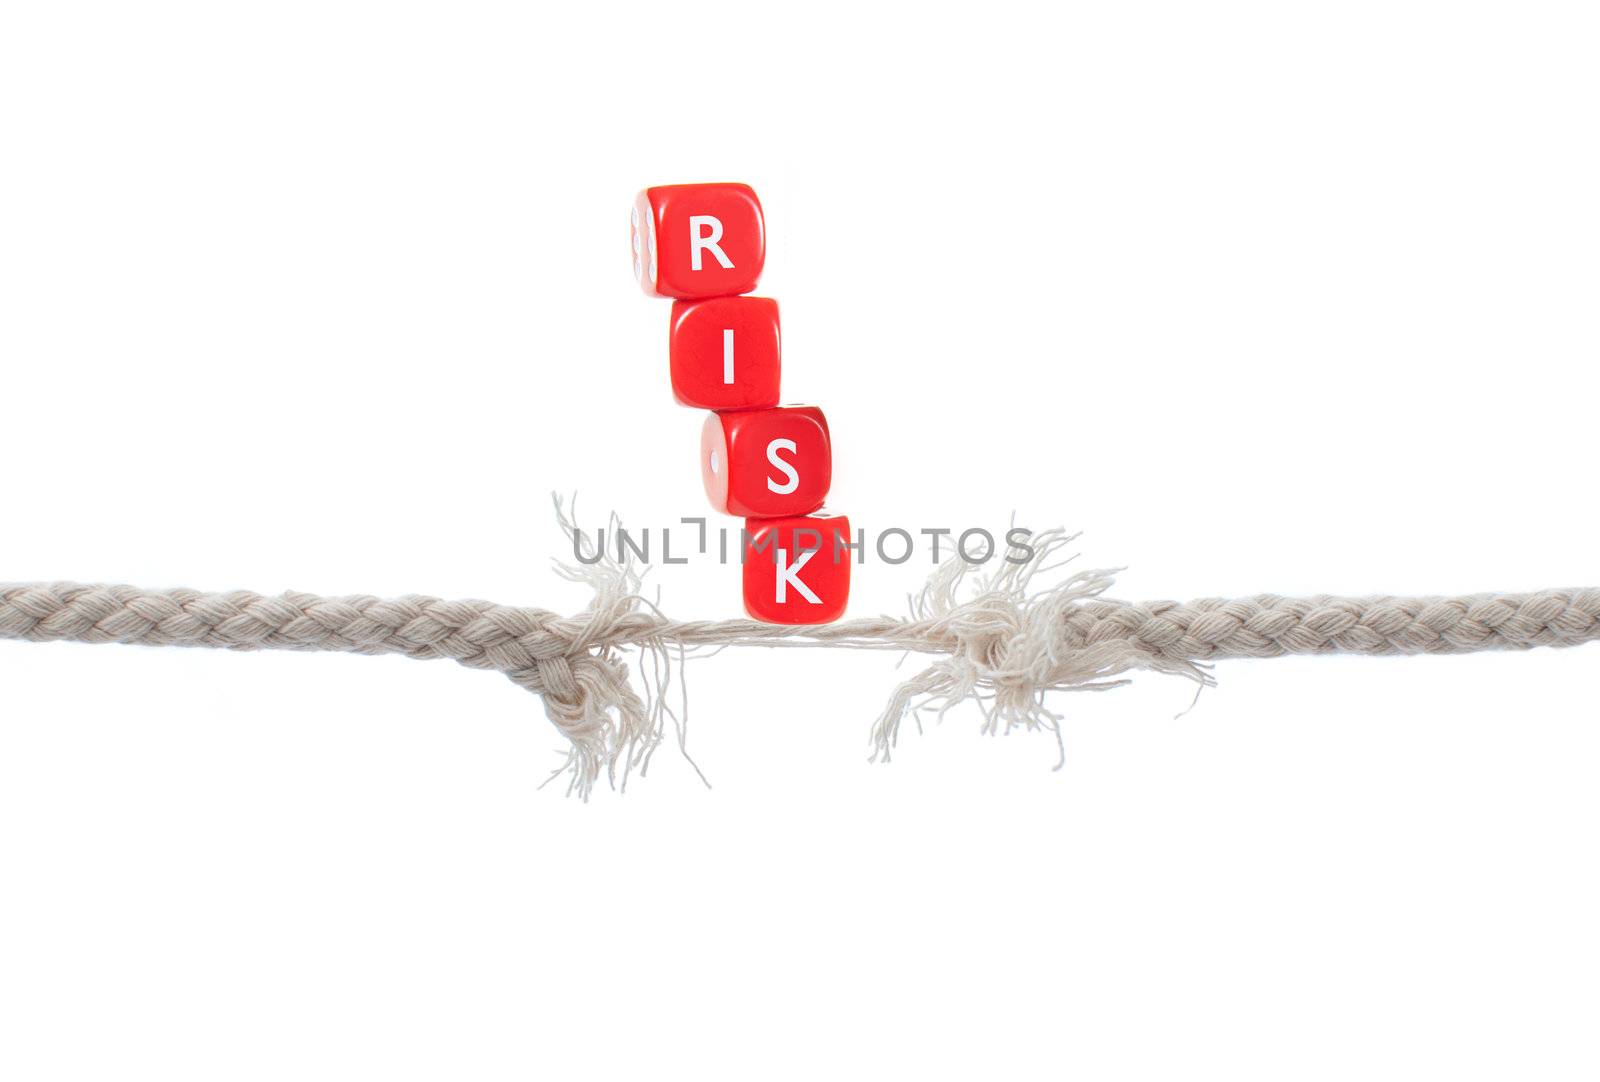 Dice labelled risk balanced on breaking rope